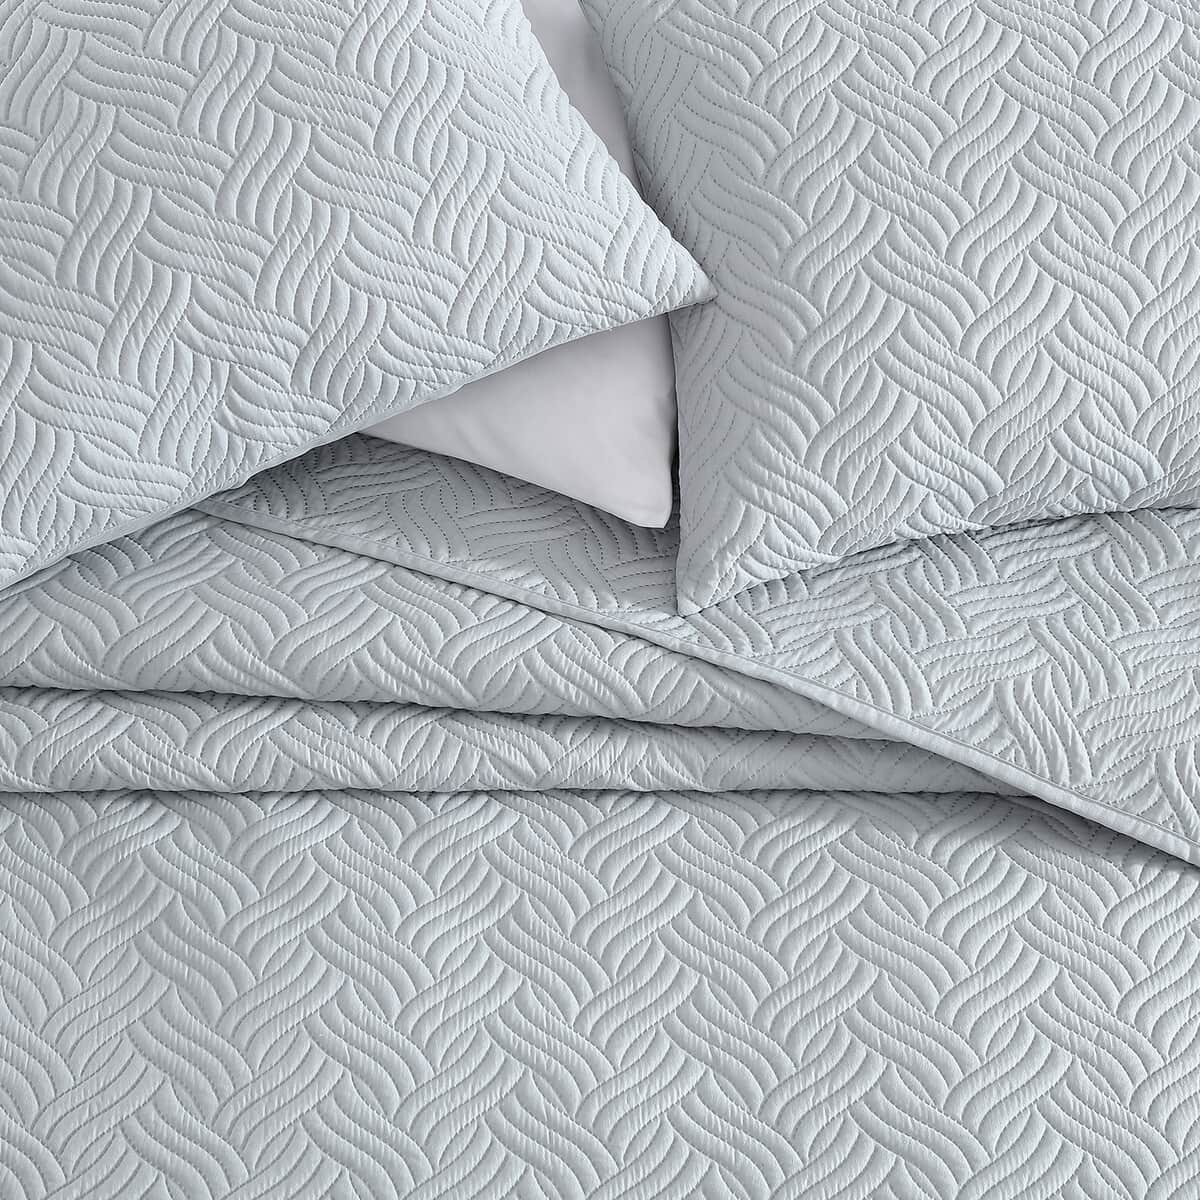 The Nesting Company- Willow 3 Piece Queen Quilt Set Gray | Bed Comforters | Polyester Comforter | Bedding Sets image number 5